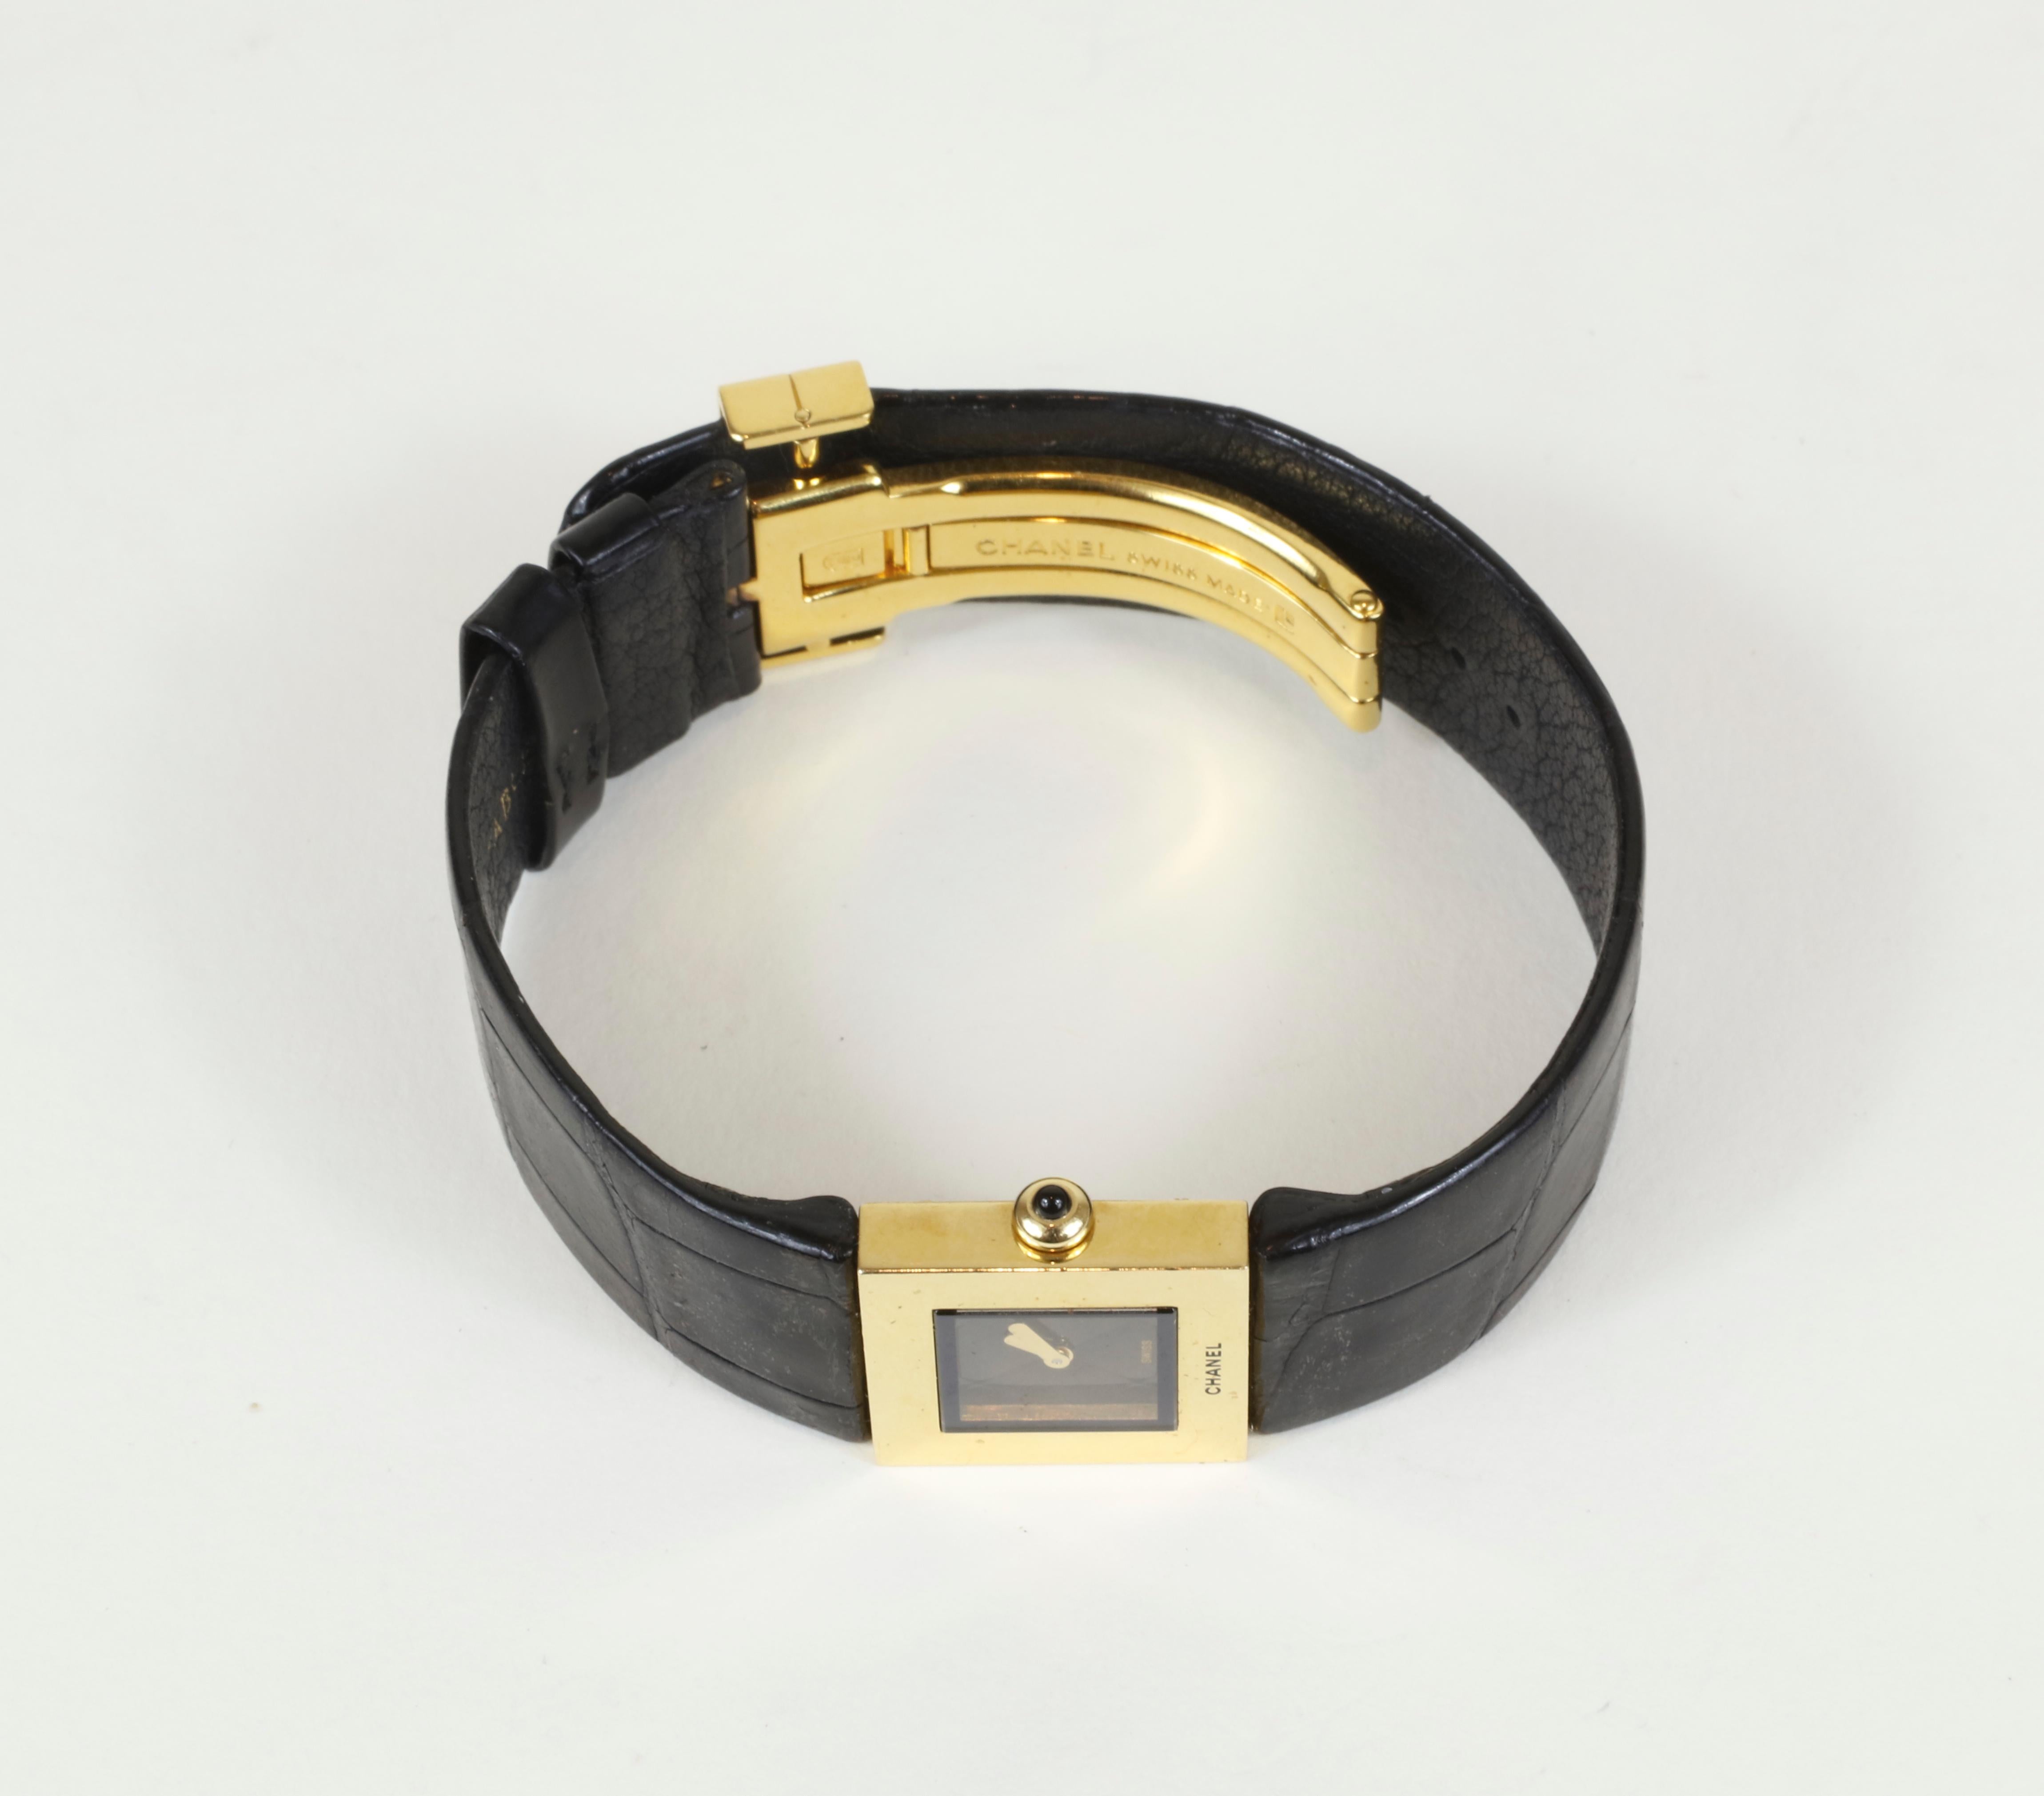 Chanel 18k Gold Black Alligator Band Watch
From 1990's
